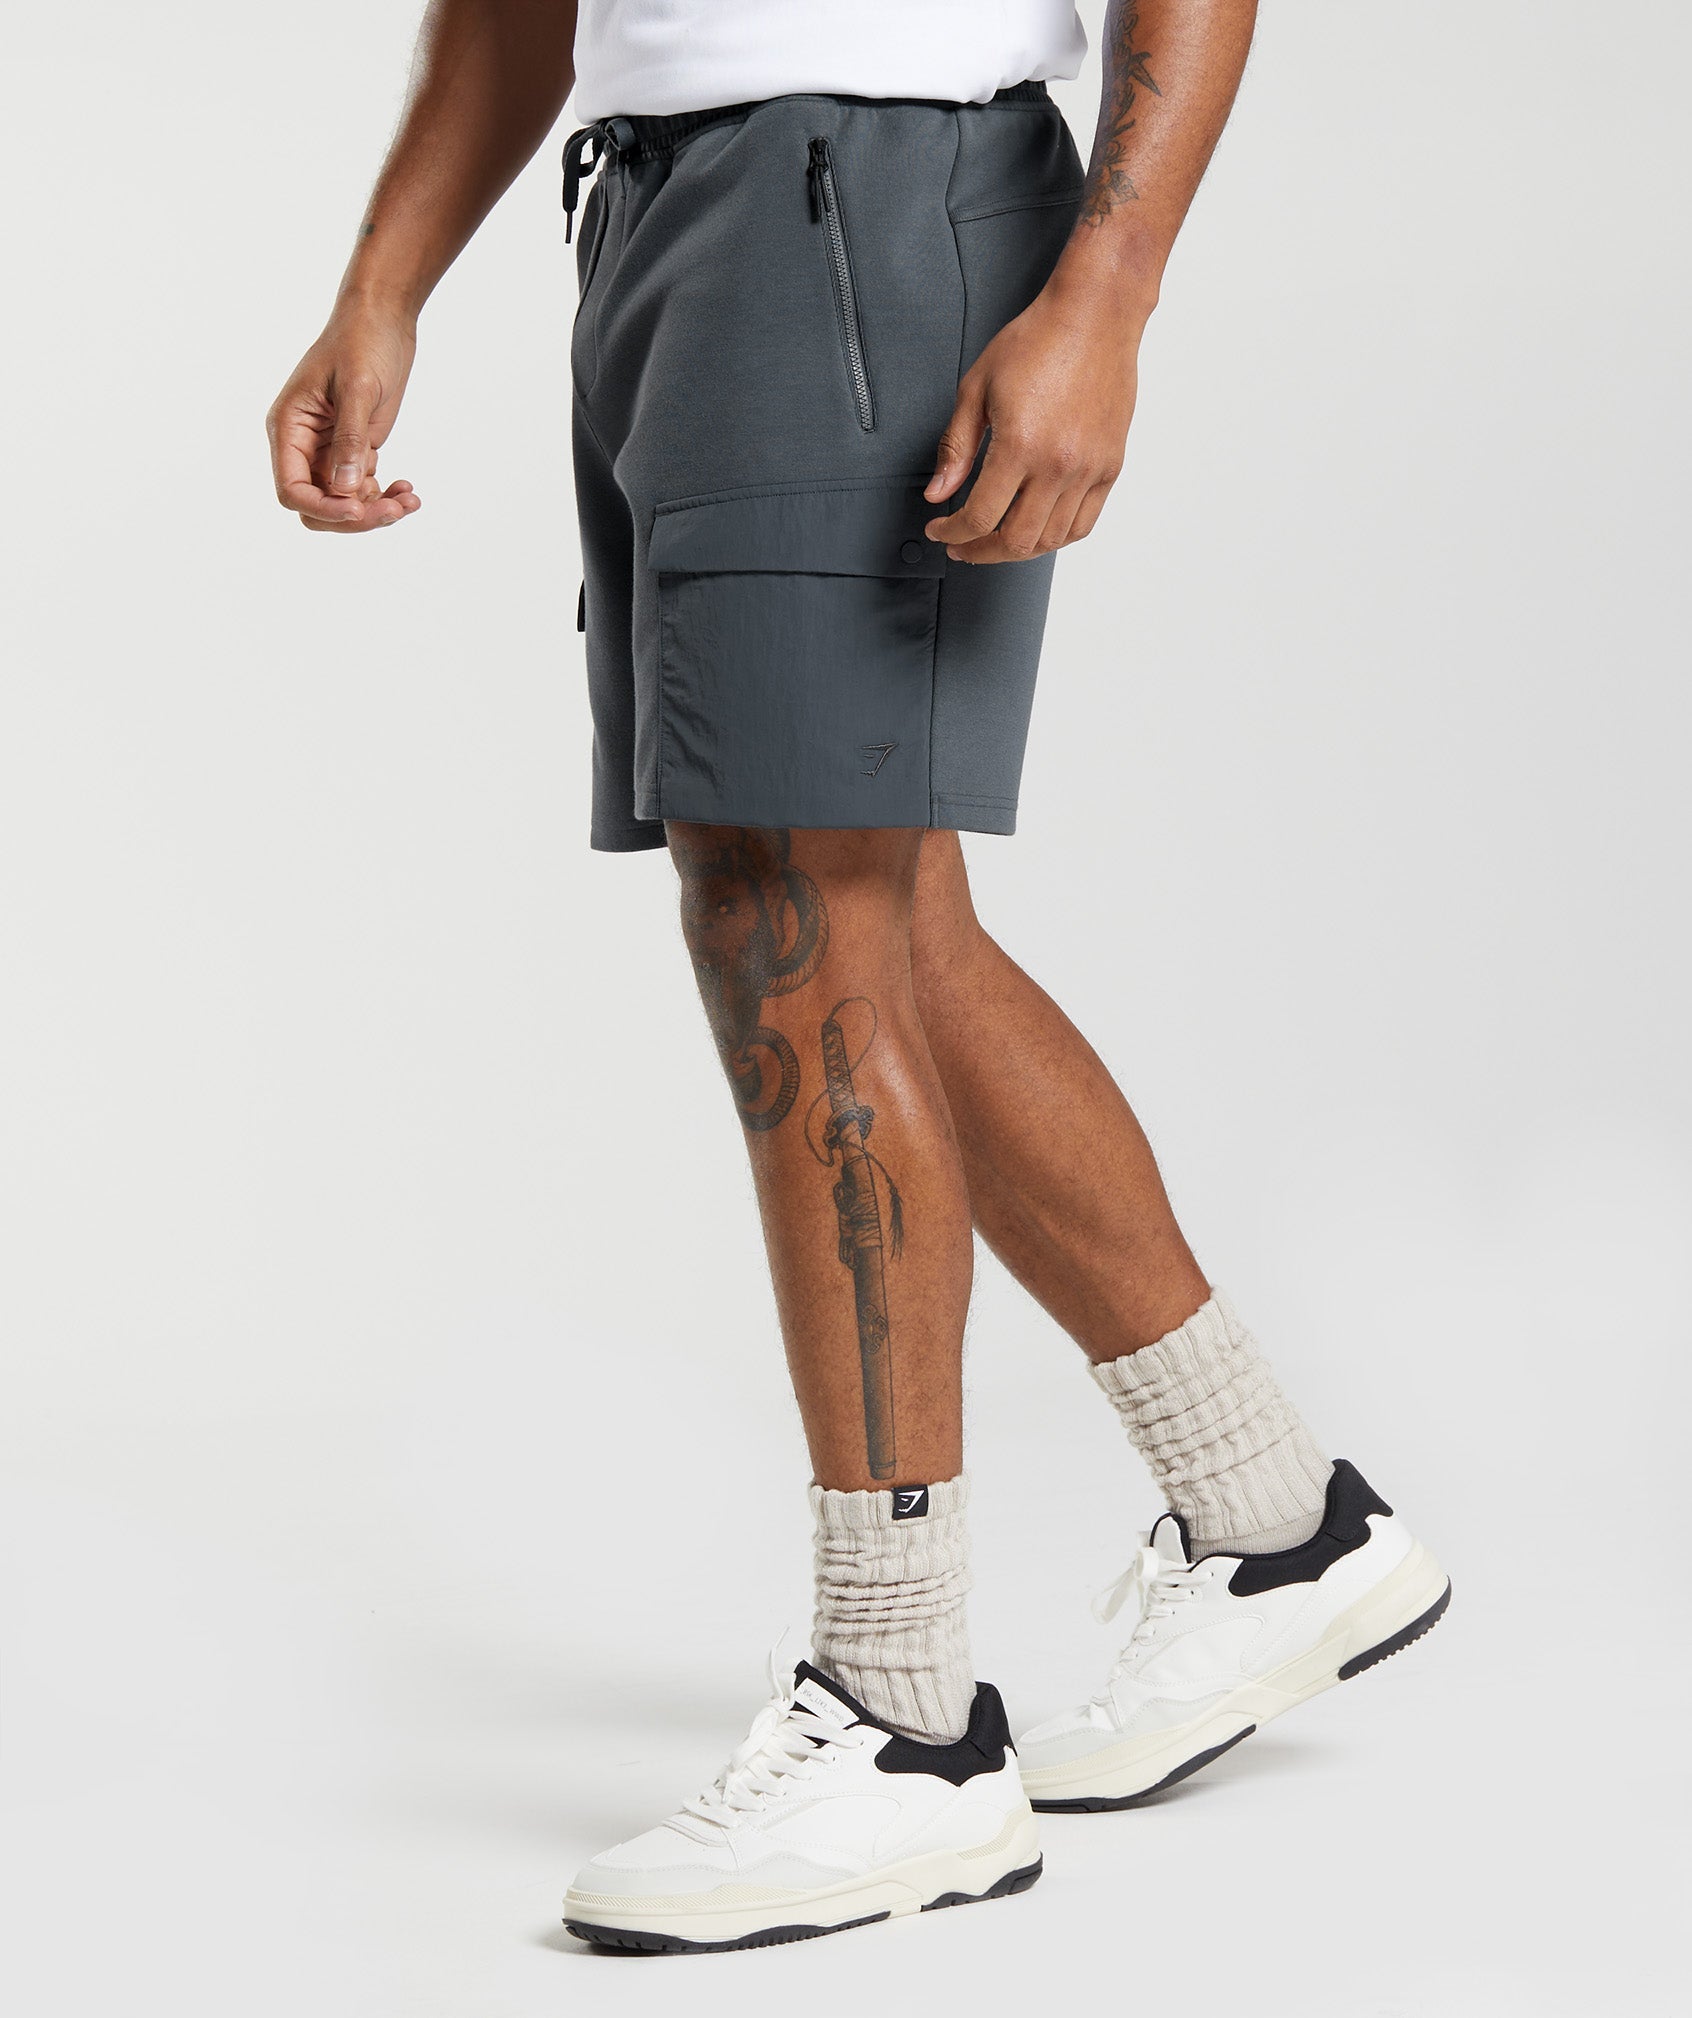 Rest Day Commute Shorts in Cosmic Grey - view 3